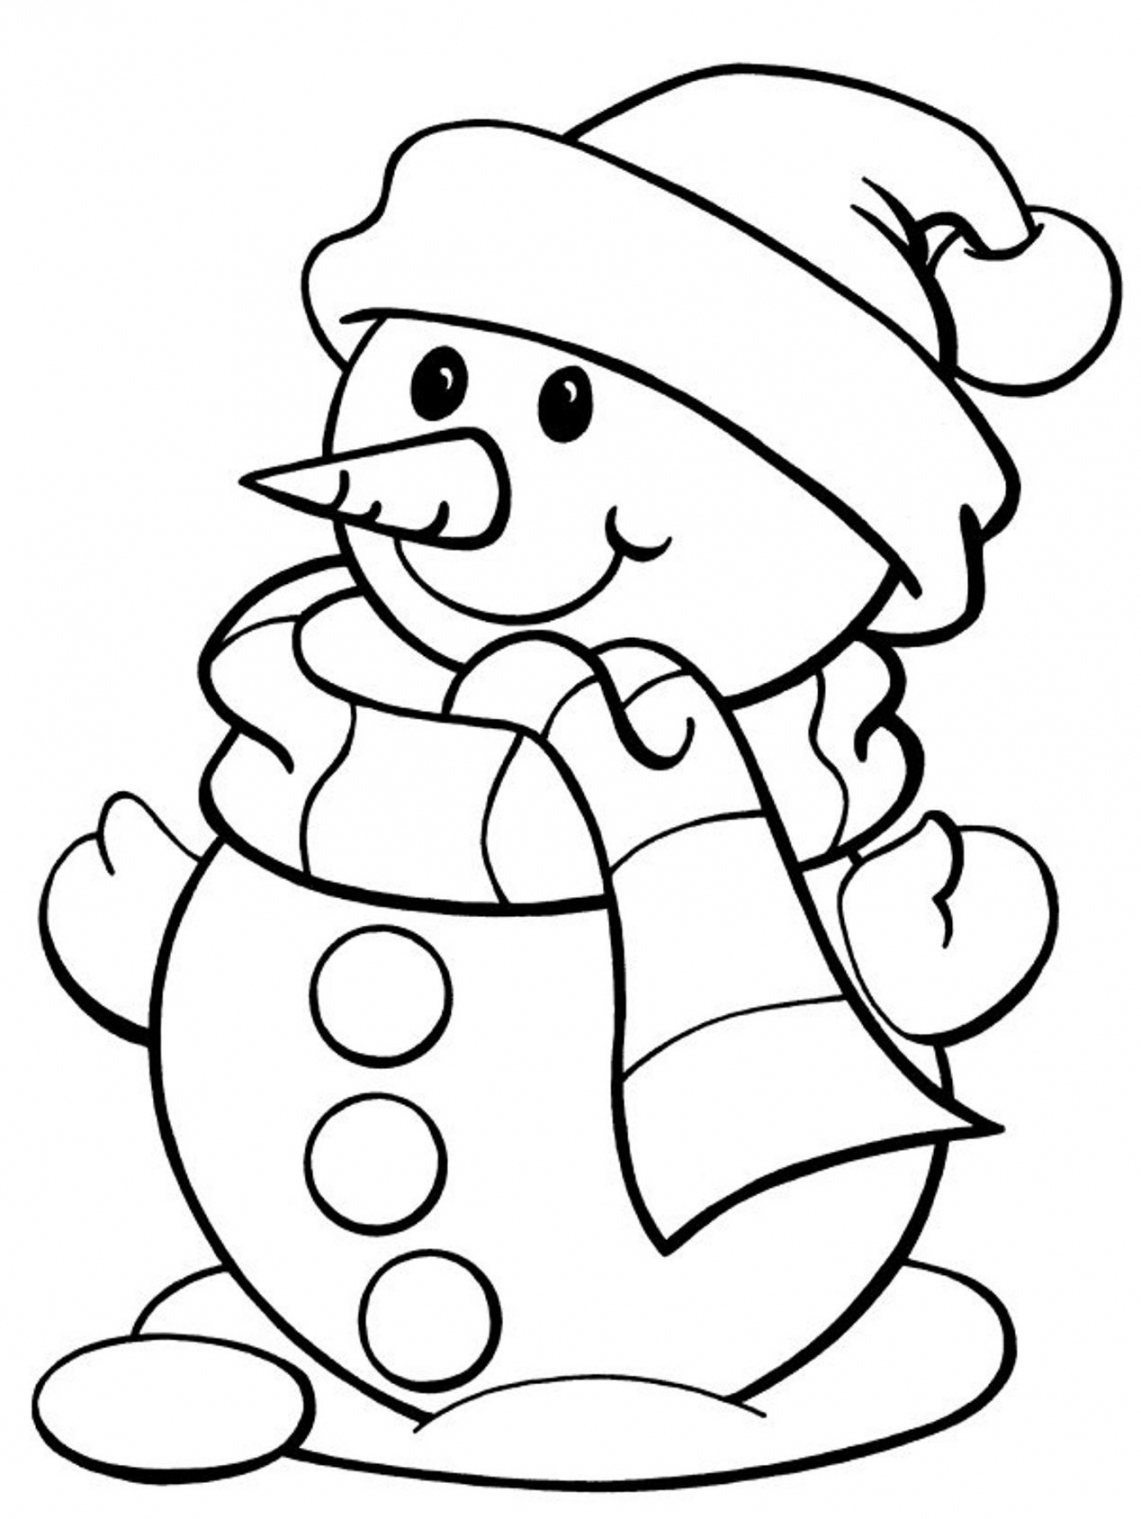 Free Printable Winter Coloring Pages - Printable - Free Printable Winter Coloring Pages For Kids